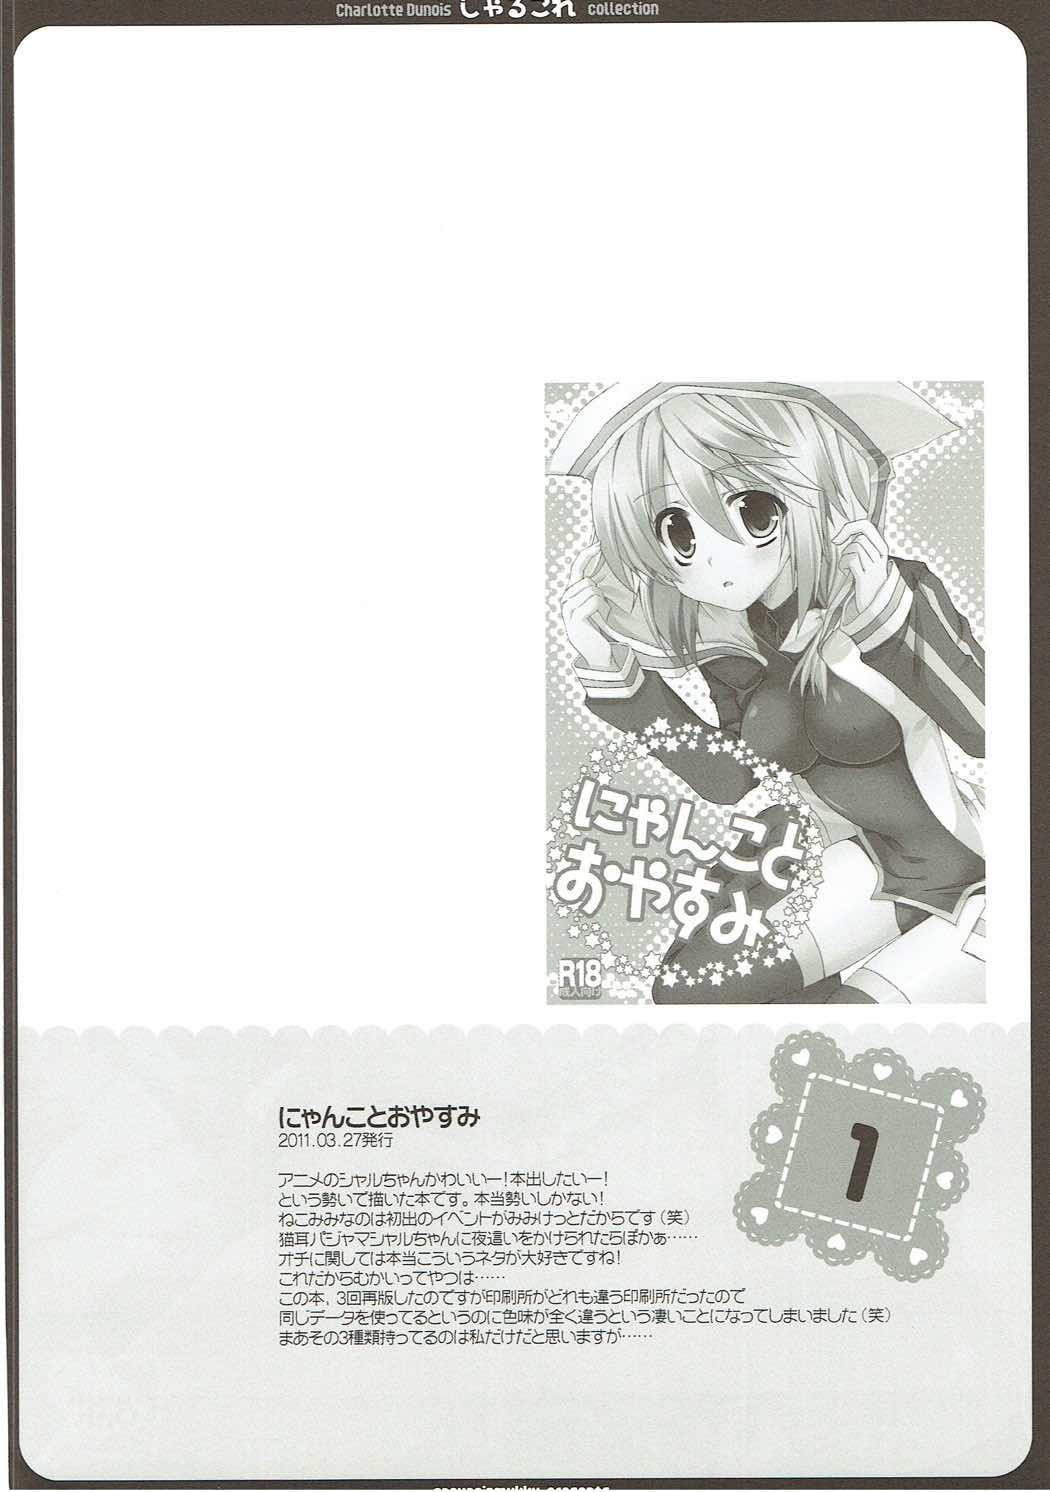 CharColle - Charlotte Dunois collection 2